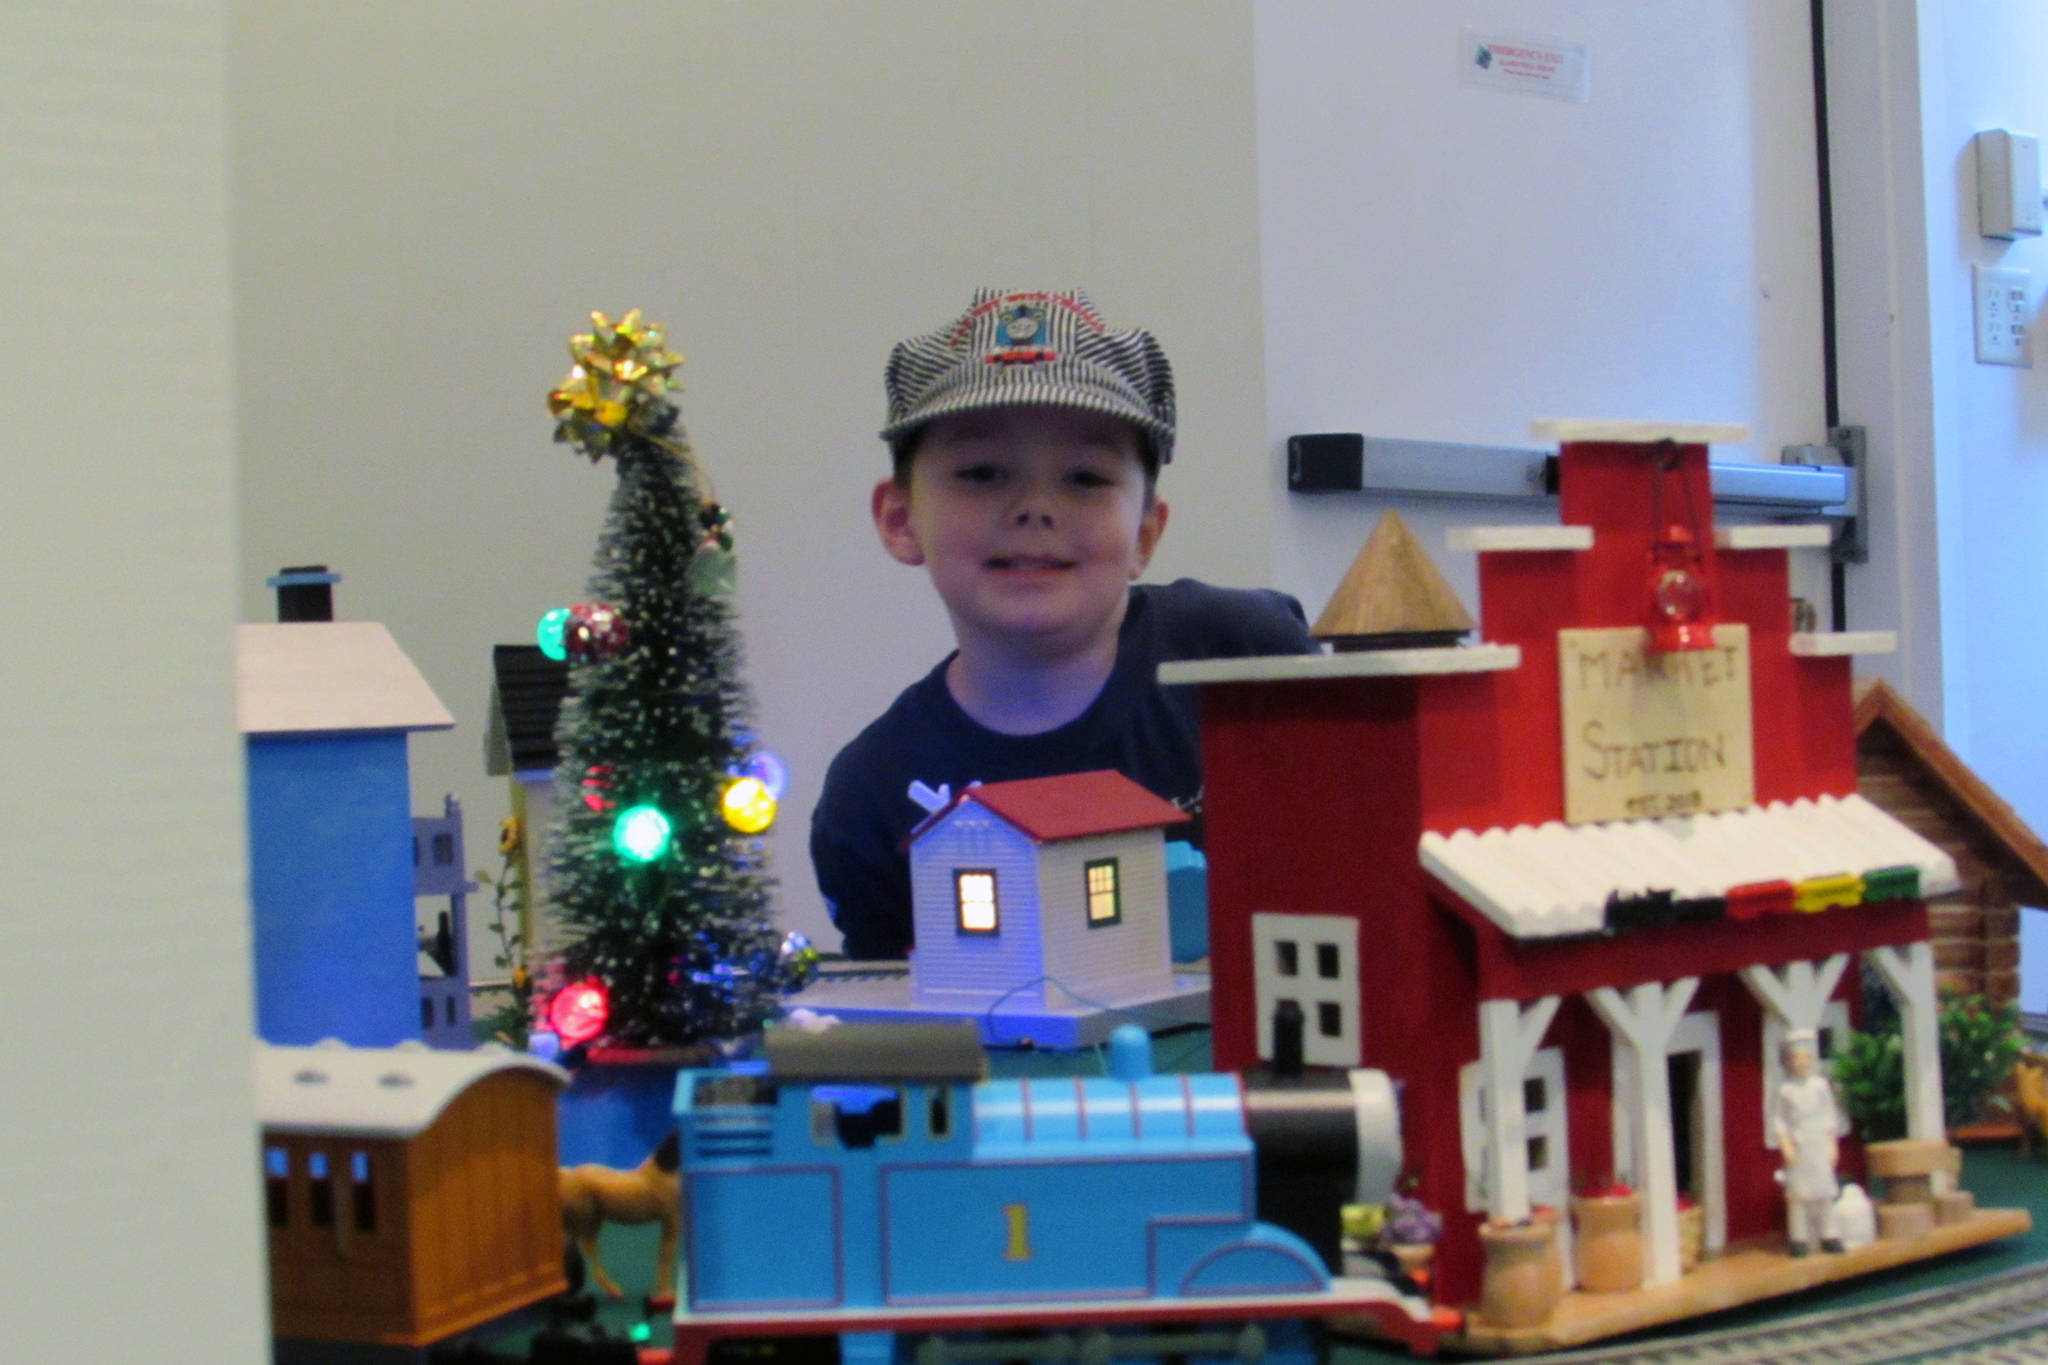 Alec Muldoon, 5, smiles as Thomas the Tank Engine makes his rounds during a model train invitational Saturday, Dec. 22, 2018. (Ben Hohenstatt | Capital City Weekly)